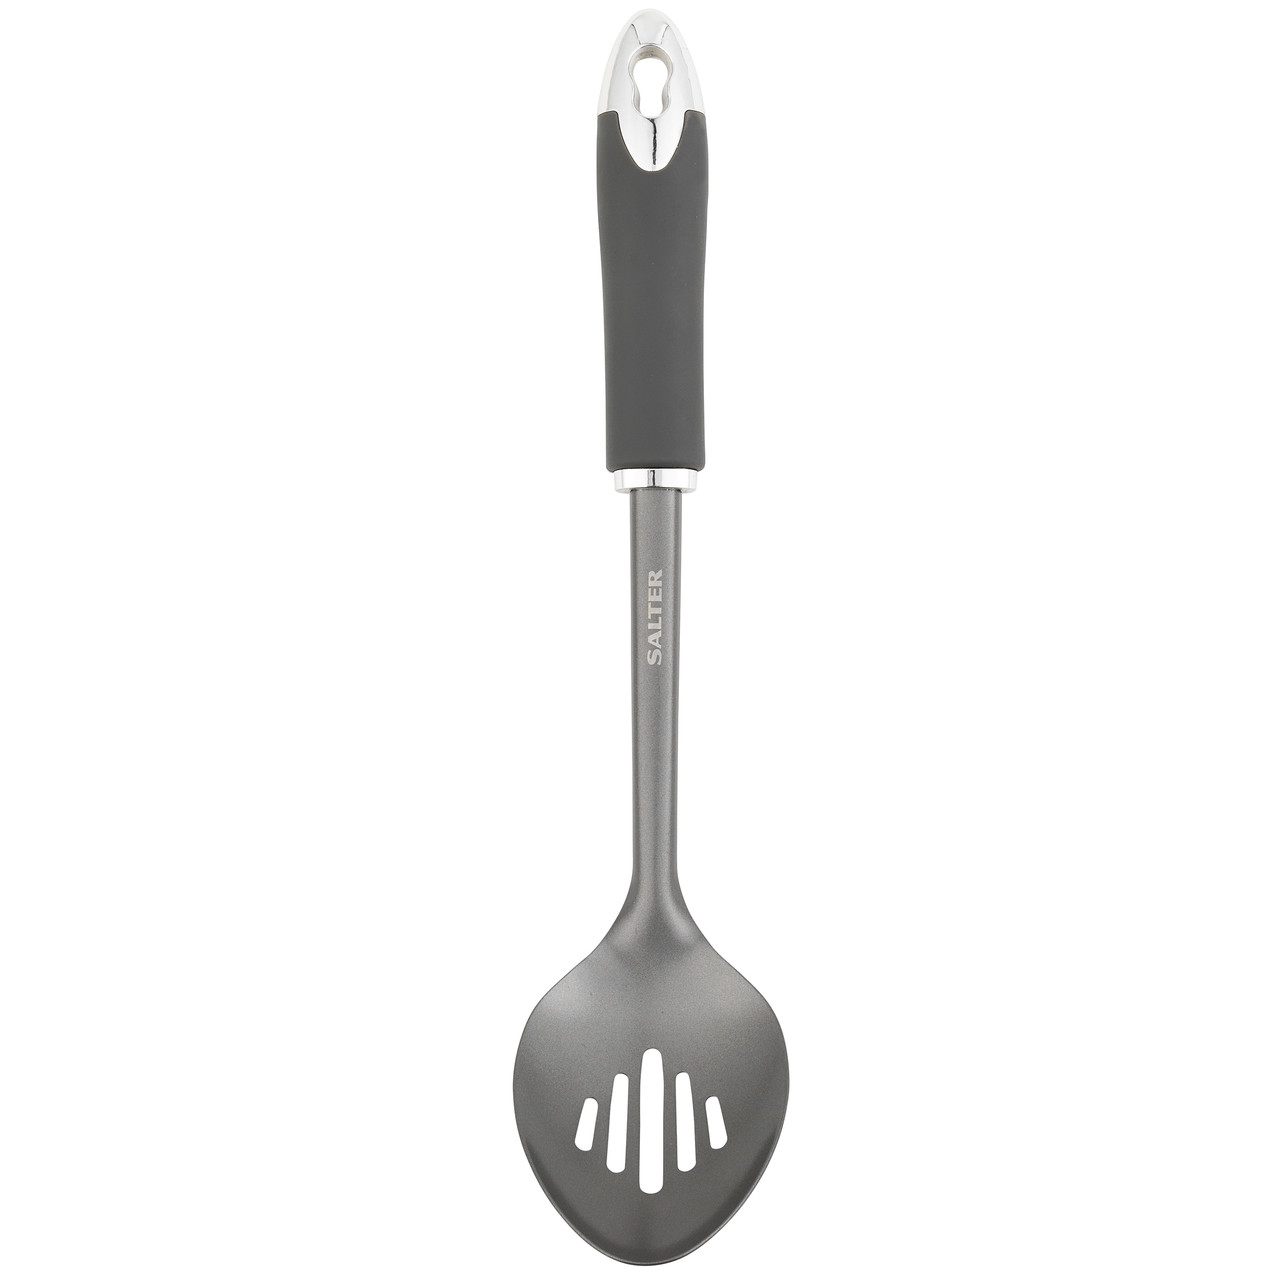 Salter Slotted Spoon, Stainless Steel, Matte Grey